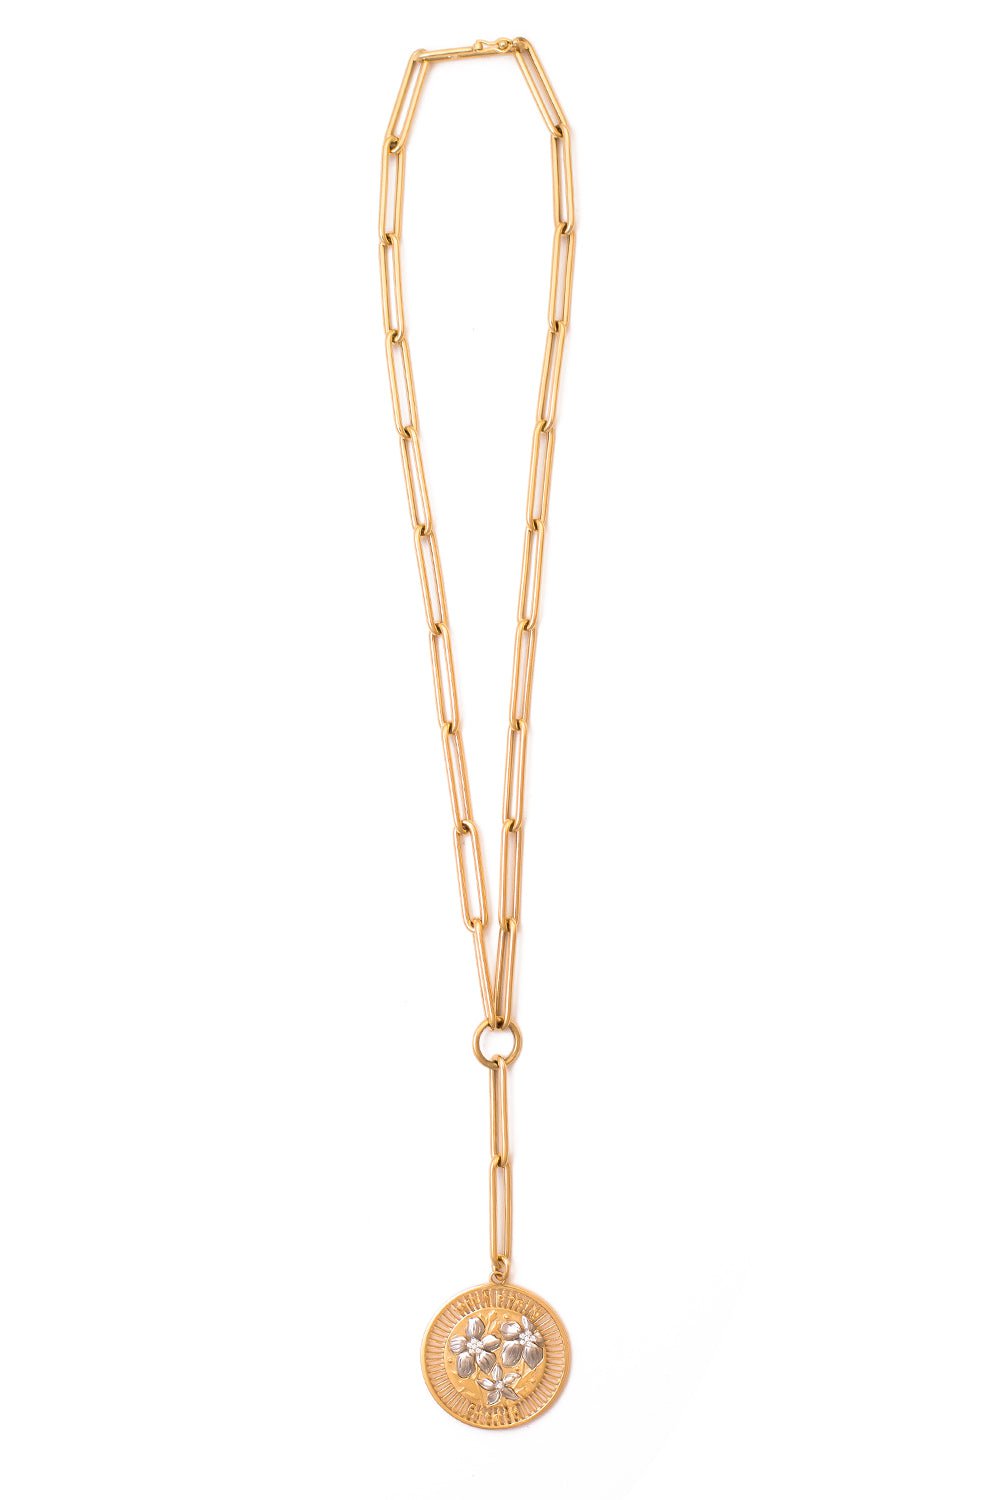 FOUNDRAE-Extended Clip Resilience Necklace-YELLOW GOLD